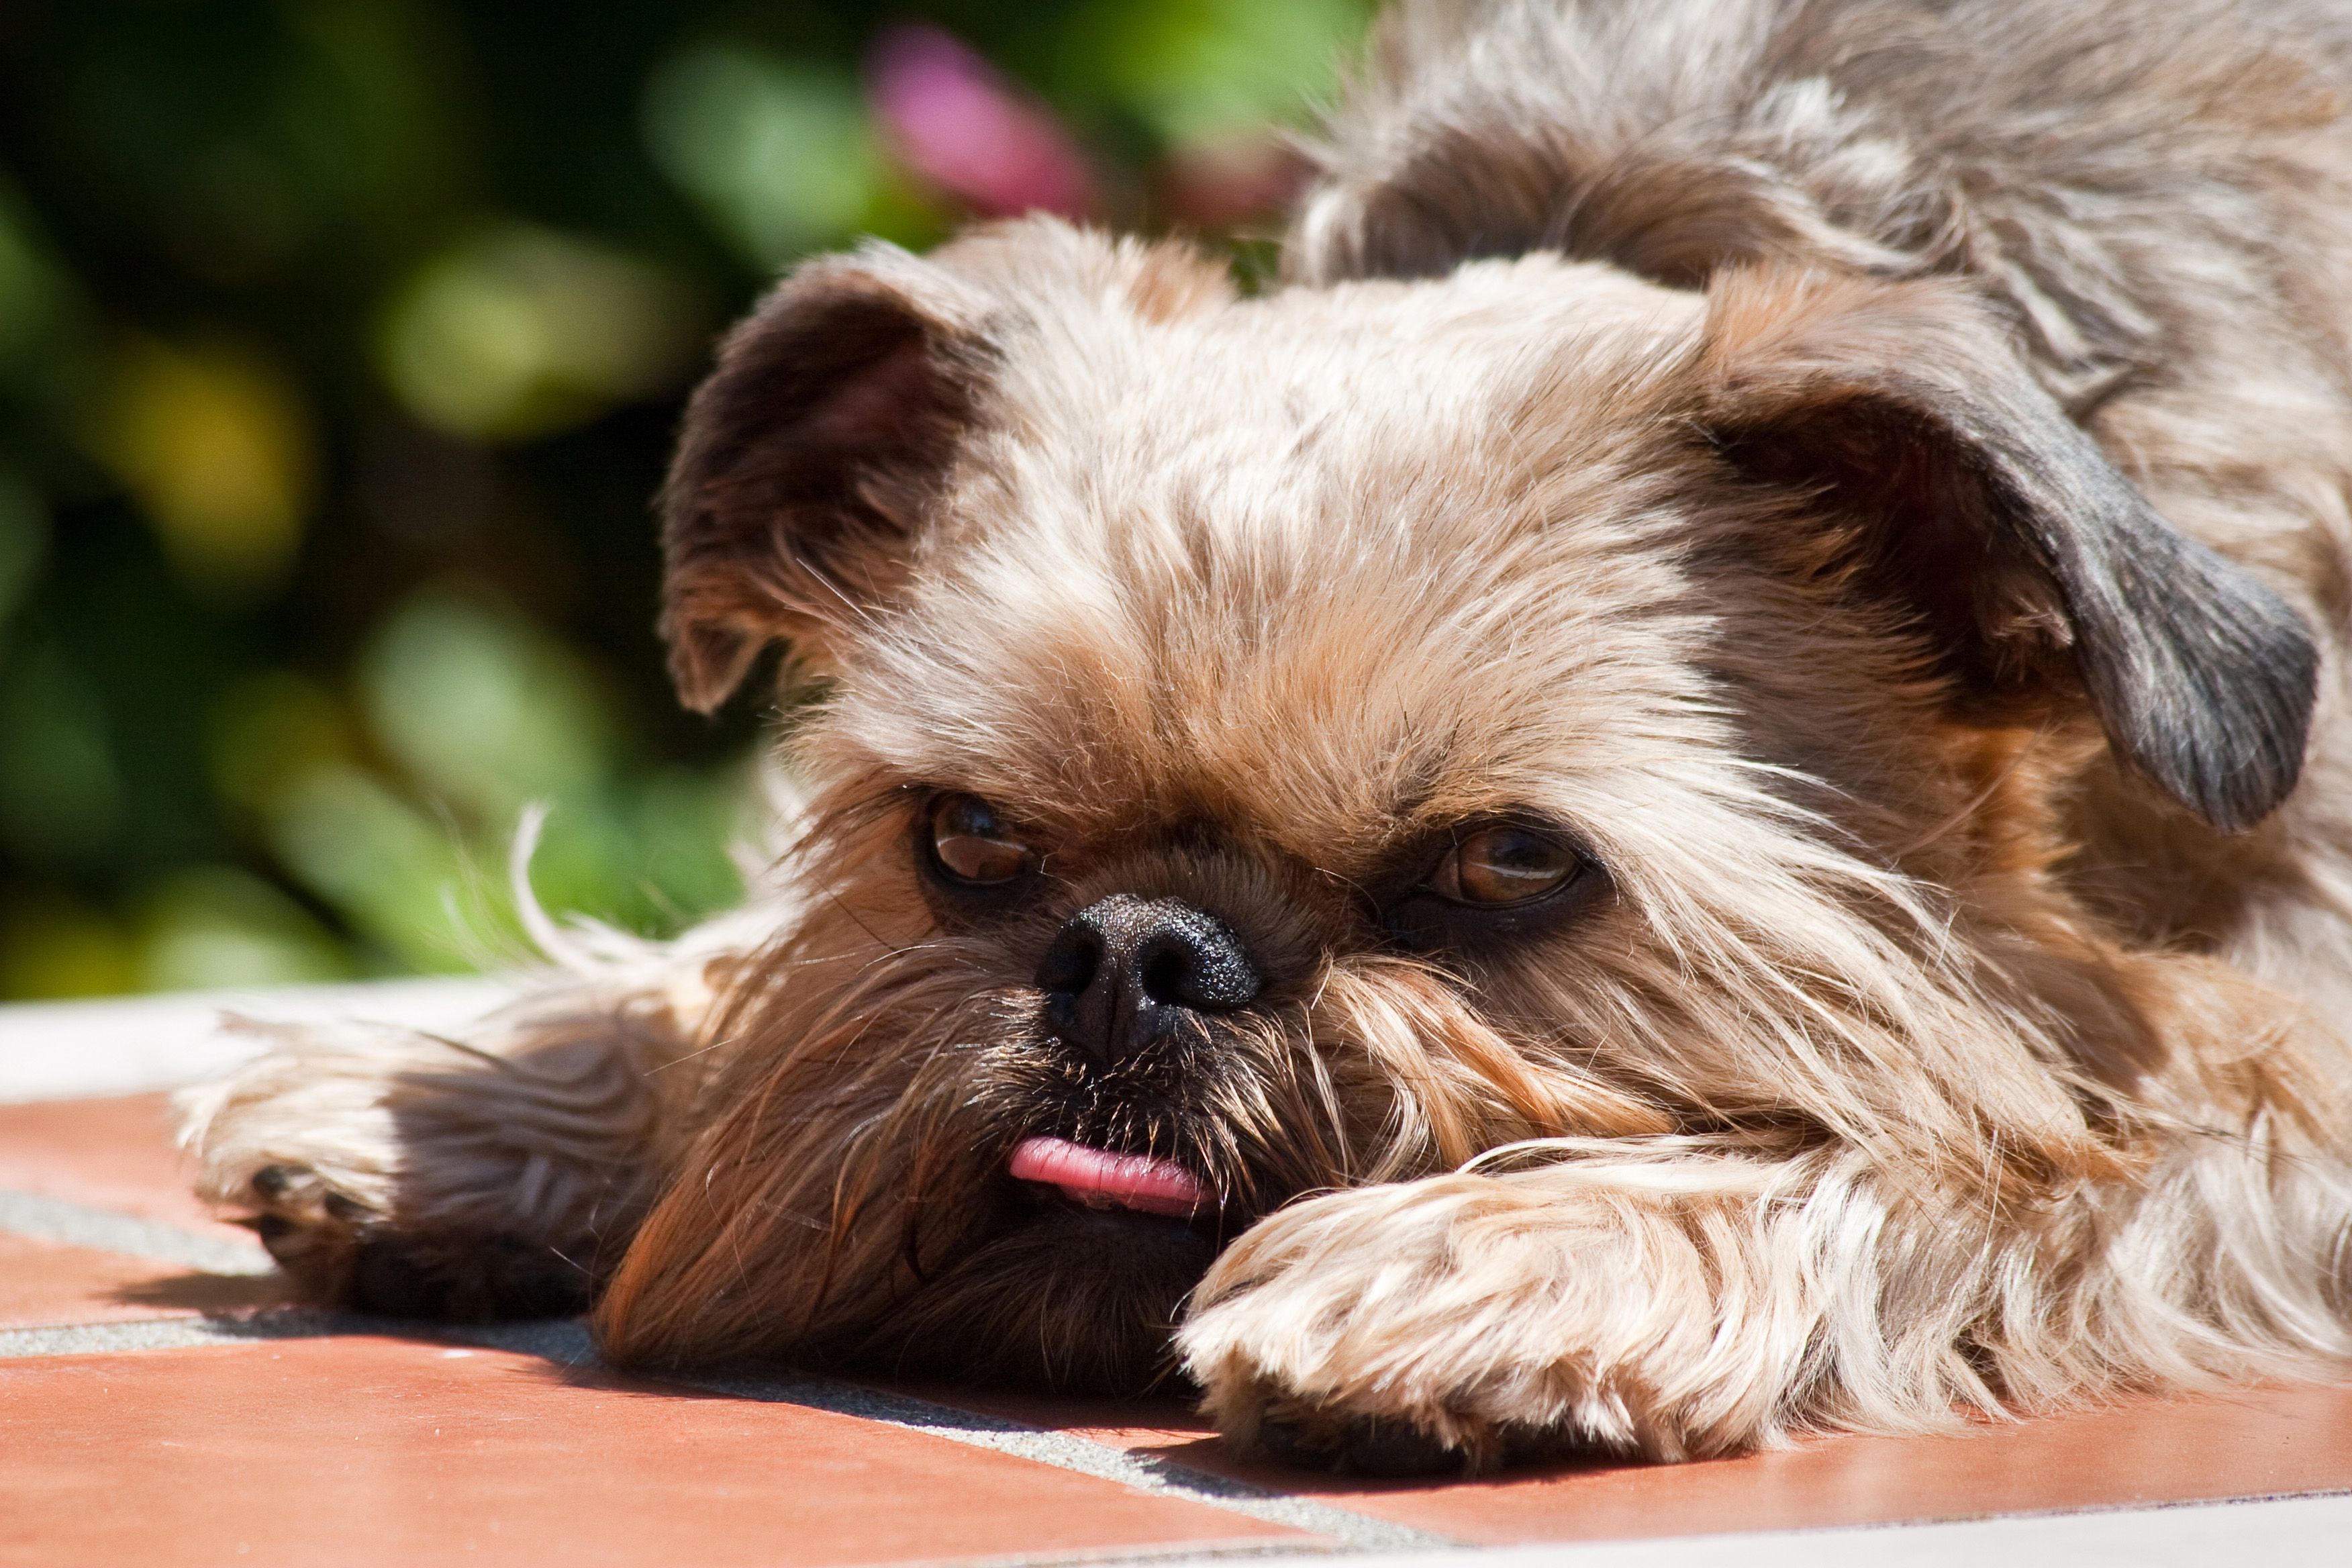 Brussels Griffon lying on tile garden bench with his tongue out, Santa Barbara, California, USA